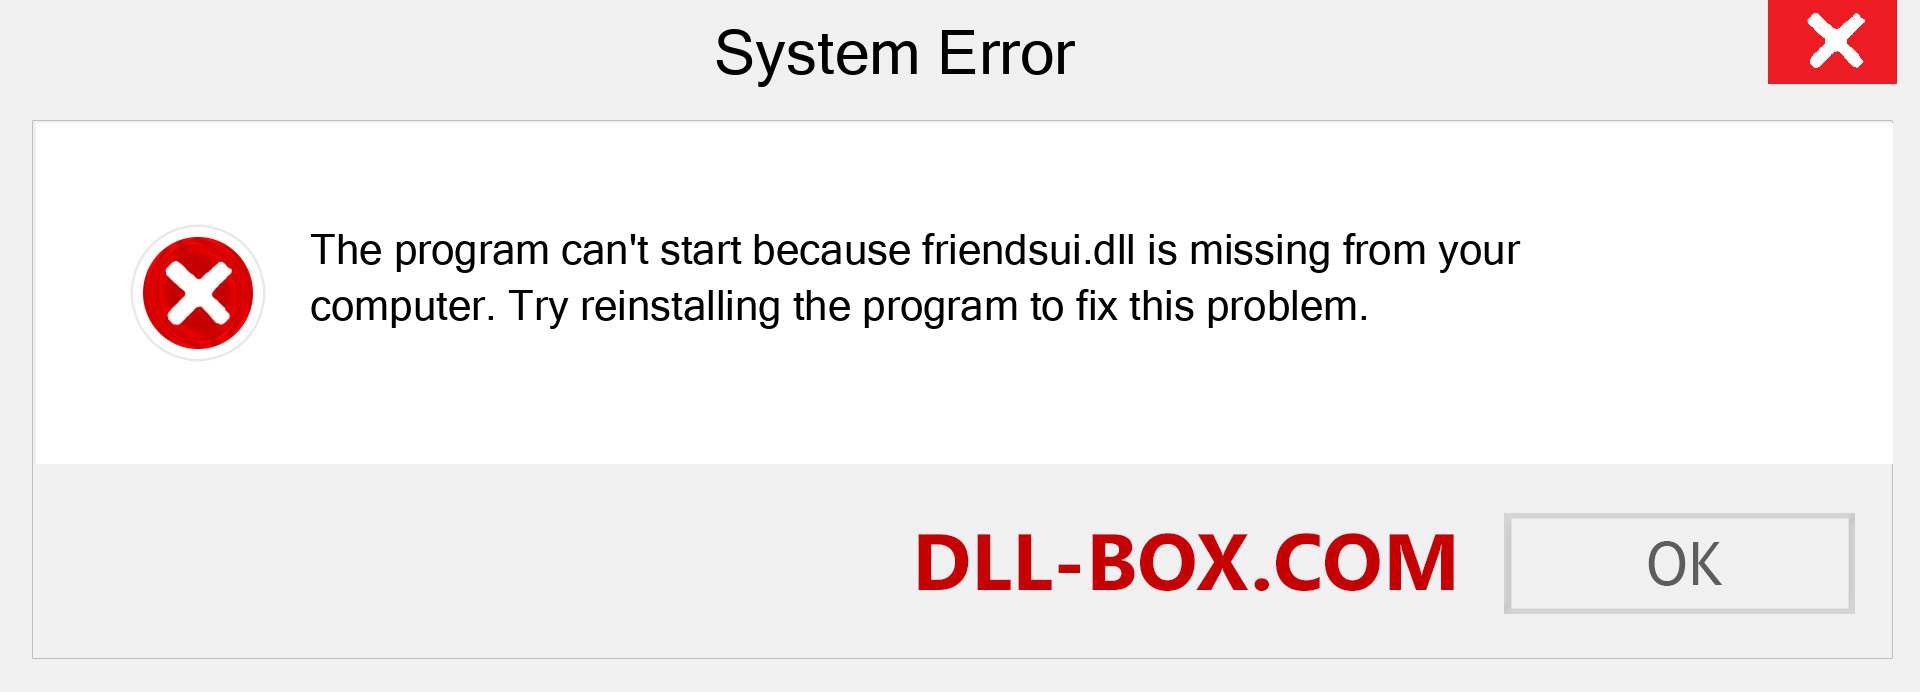  friendsui.dll file is missing?. Download for Windows 7, 8, 10 - Fix  friendsui dll Missing Error on Windows, photos, images